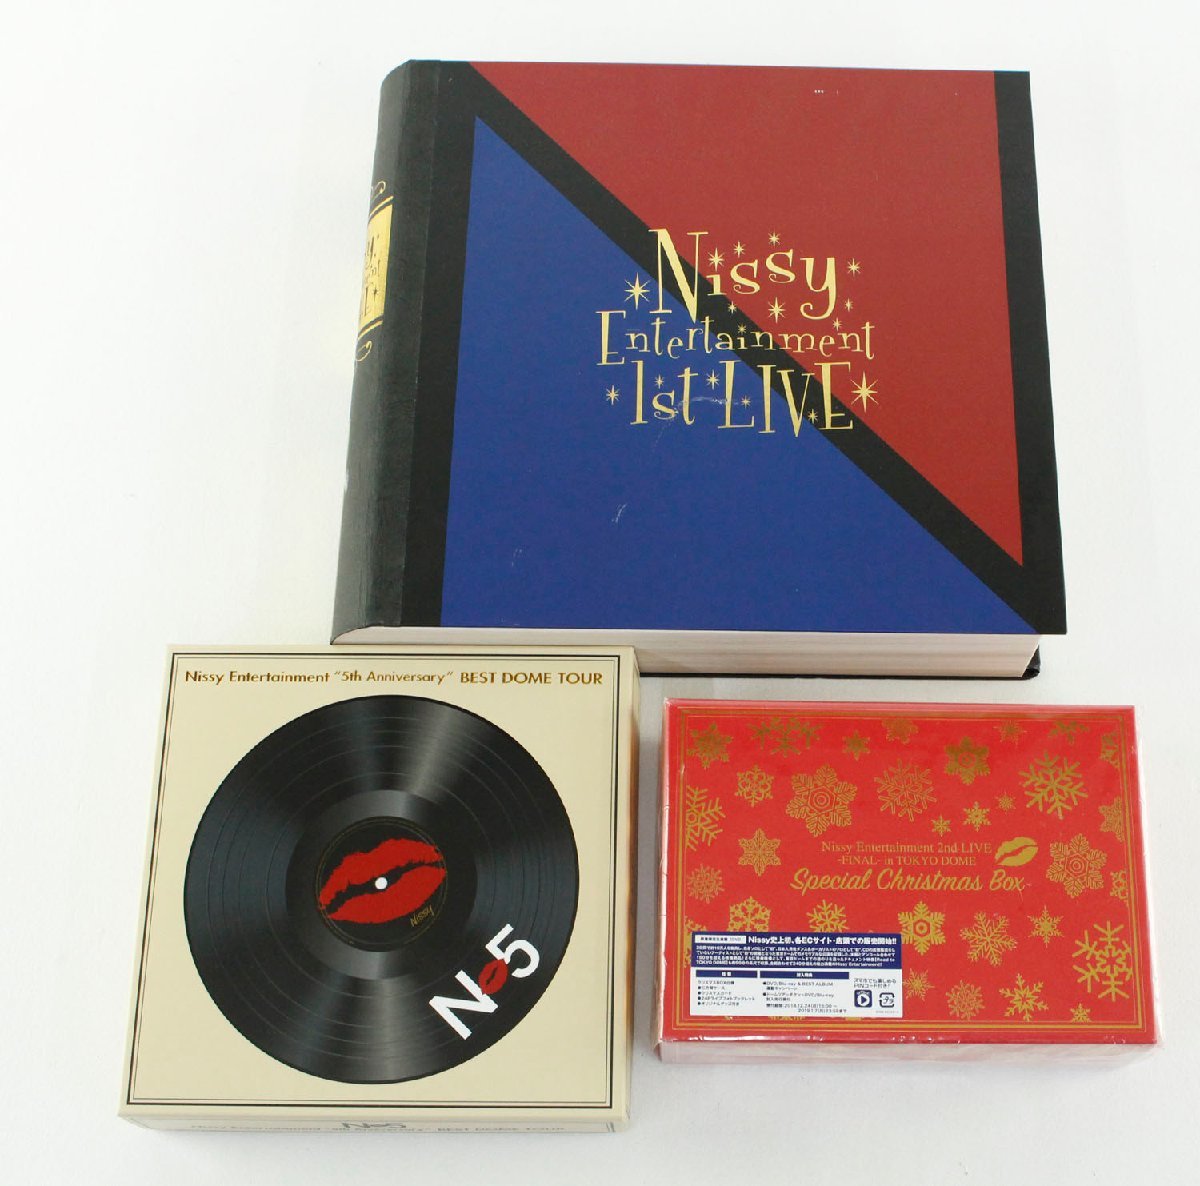 SALE／60%OFF】 Nissy ライブDVD等 纏め売り confmax.com.br